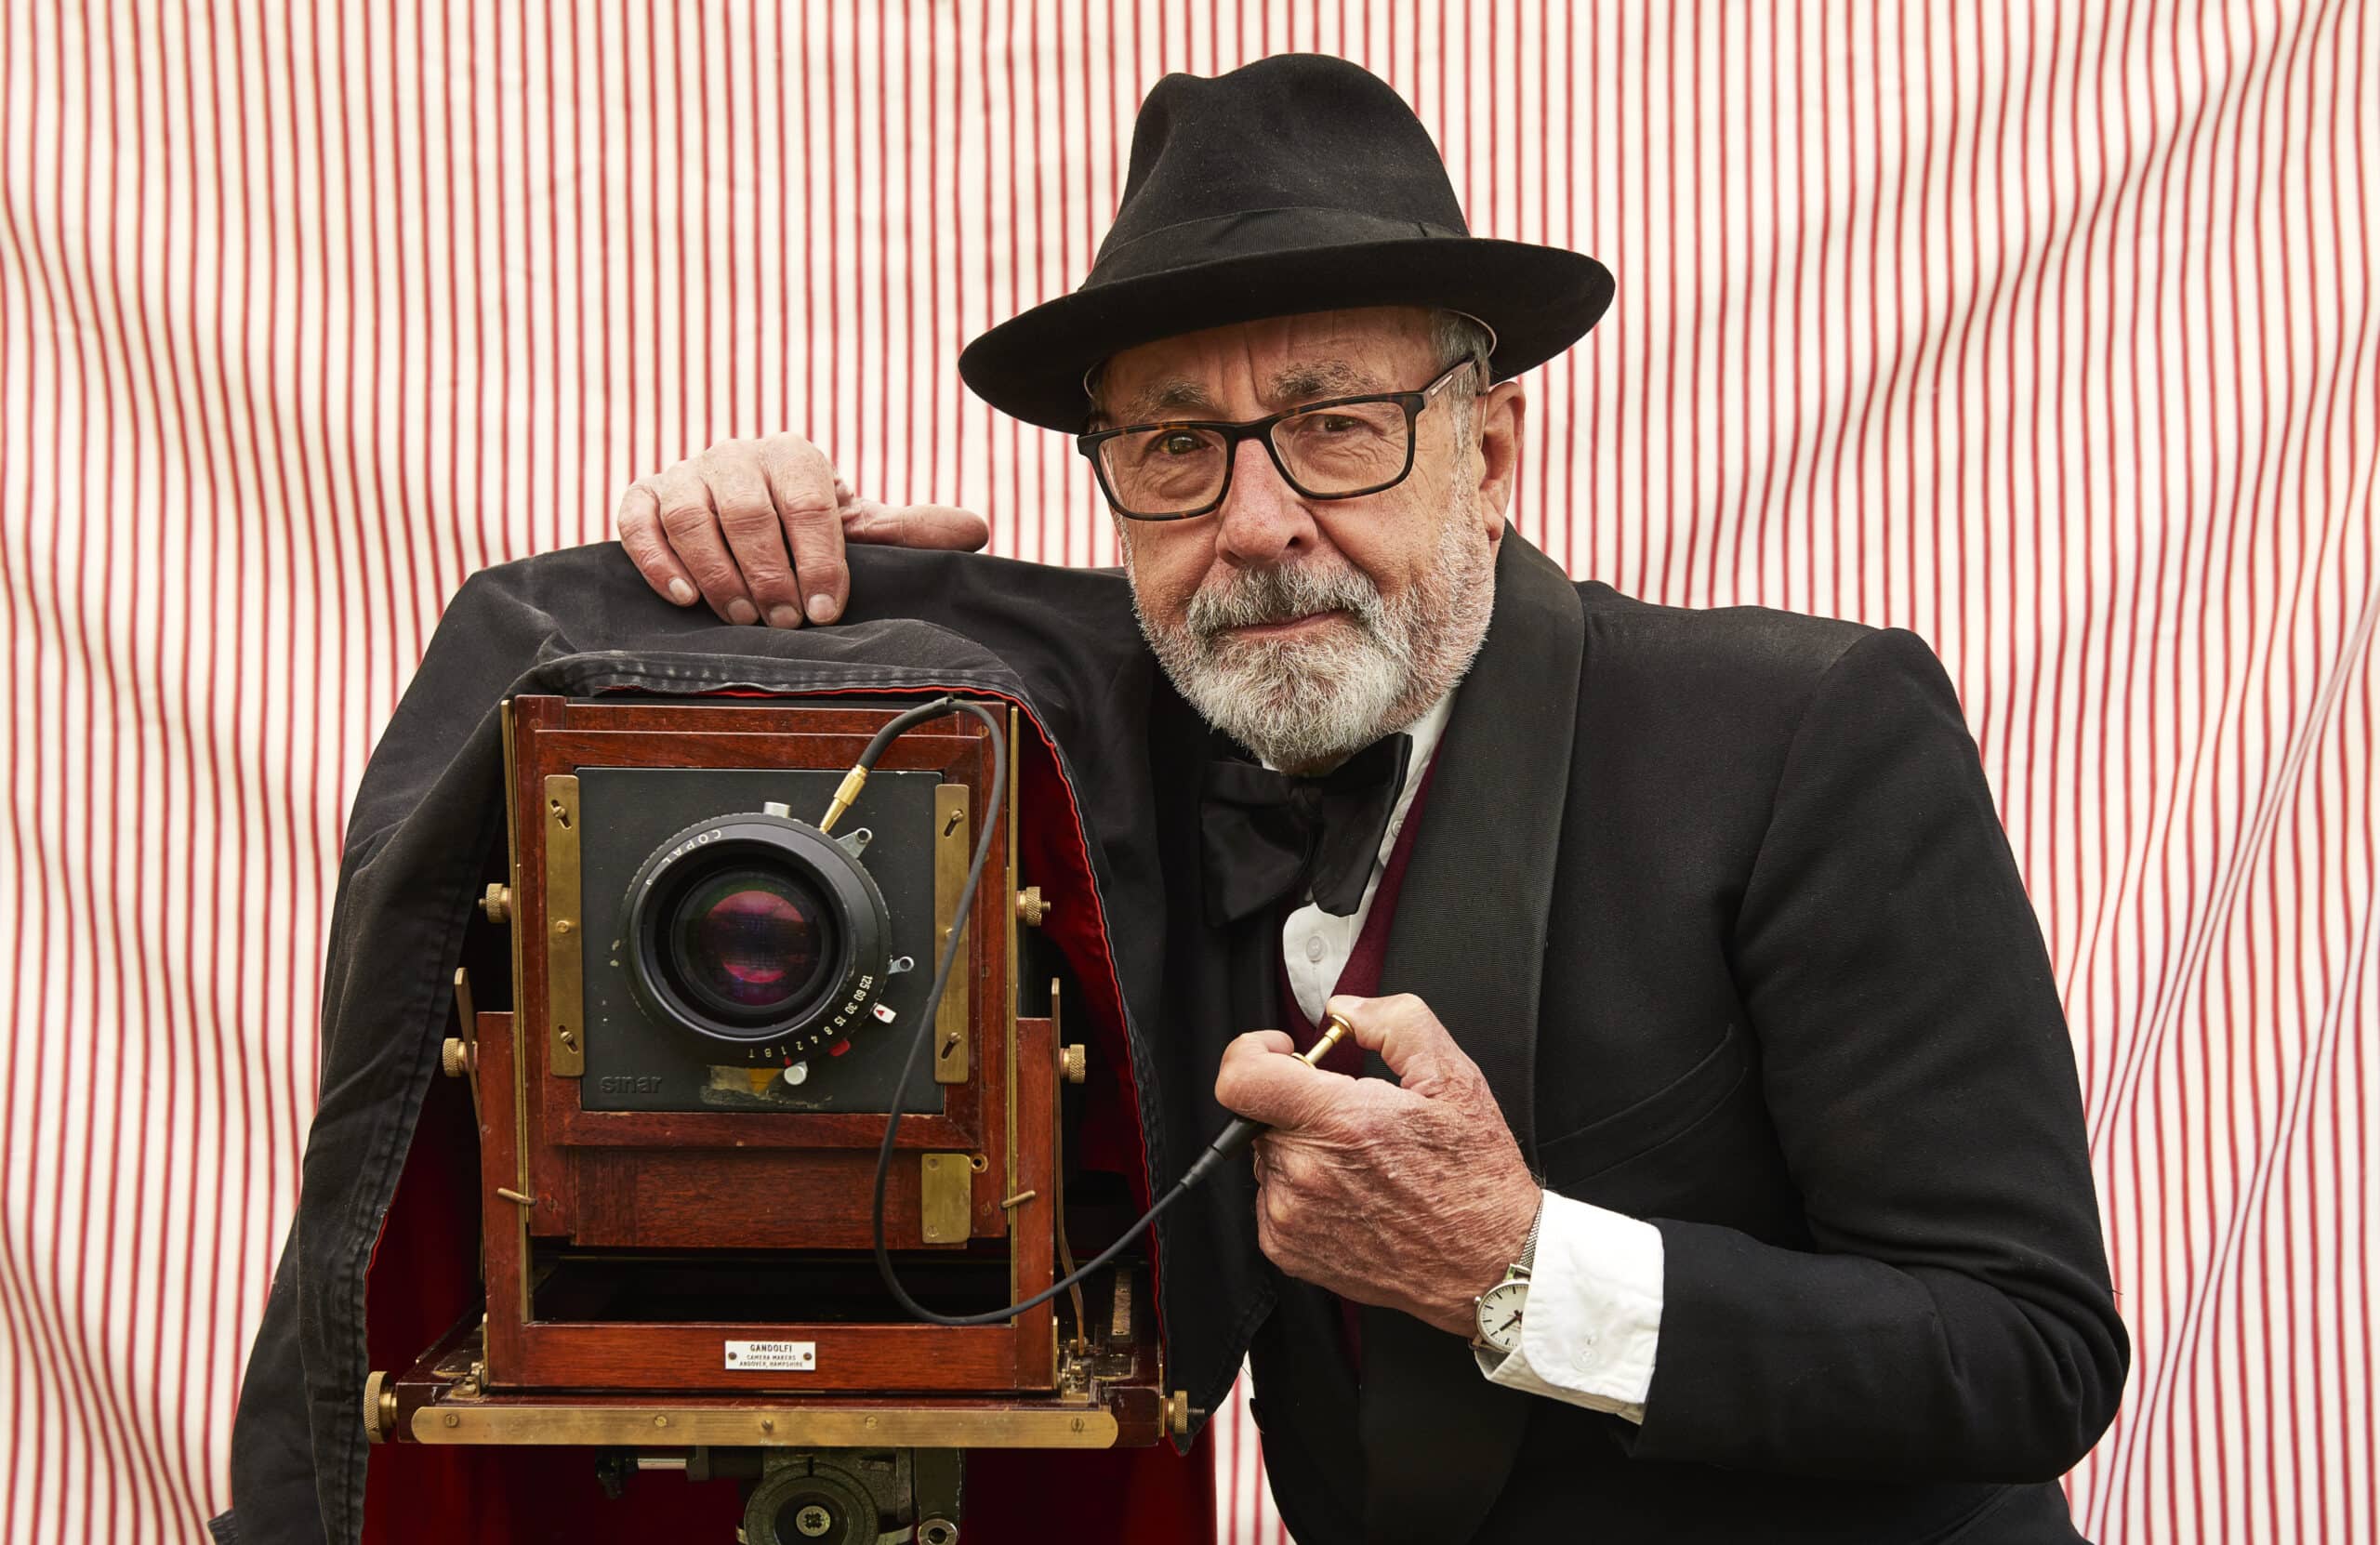 An old man poses with an old fashioned camera